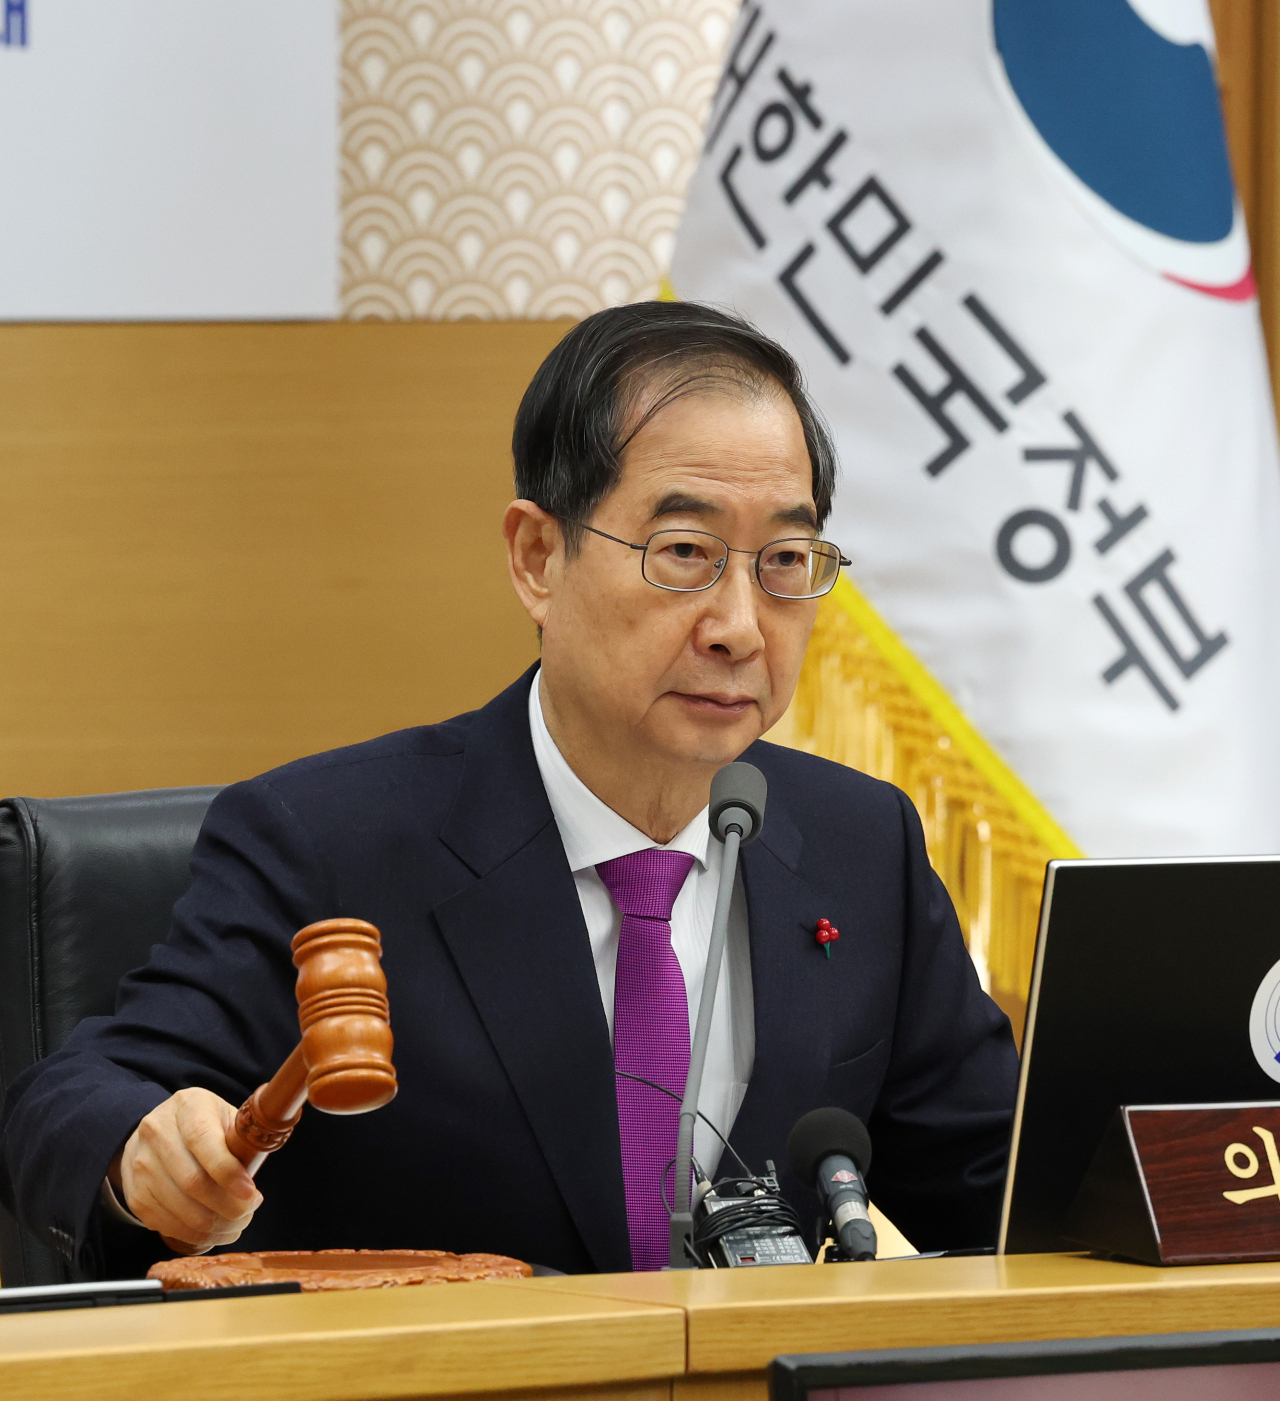 Prime Minister Han Duck-soo bangs the gavel to open a Cabinet meeting at the government complex in Sejong, central South Korea, on Tuesday, which is connected via video link with the government complex in Seoul.